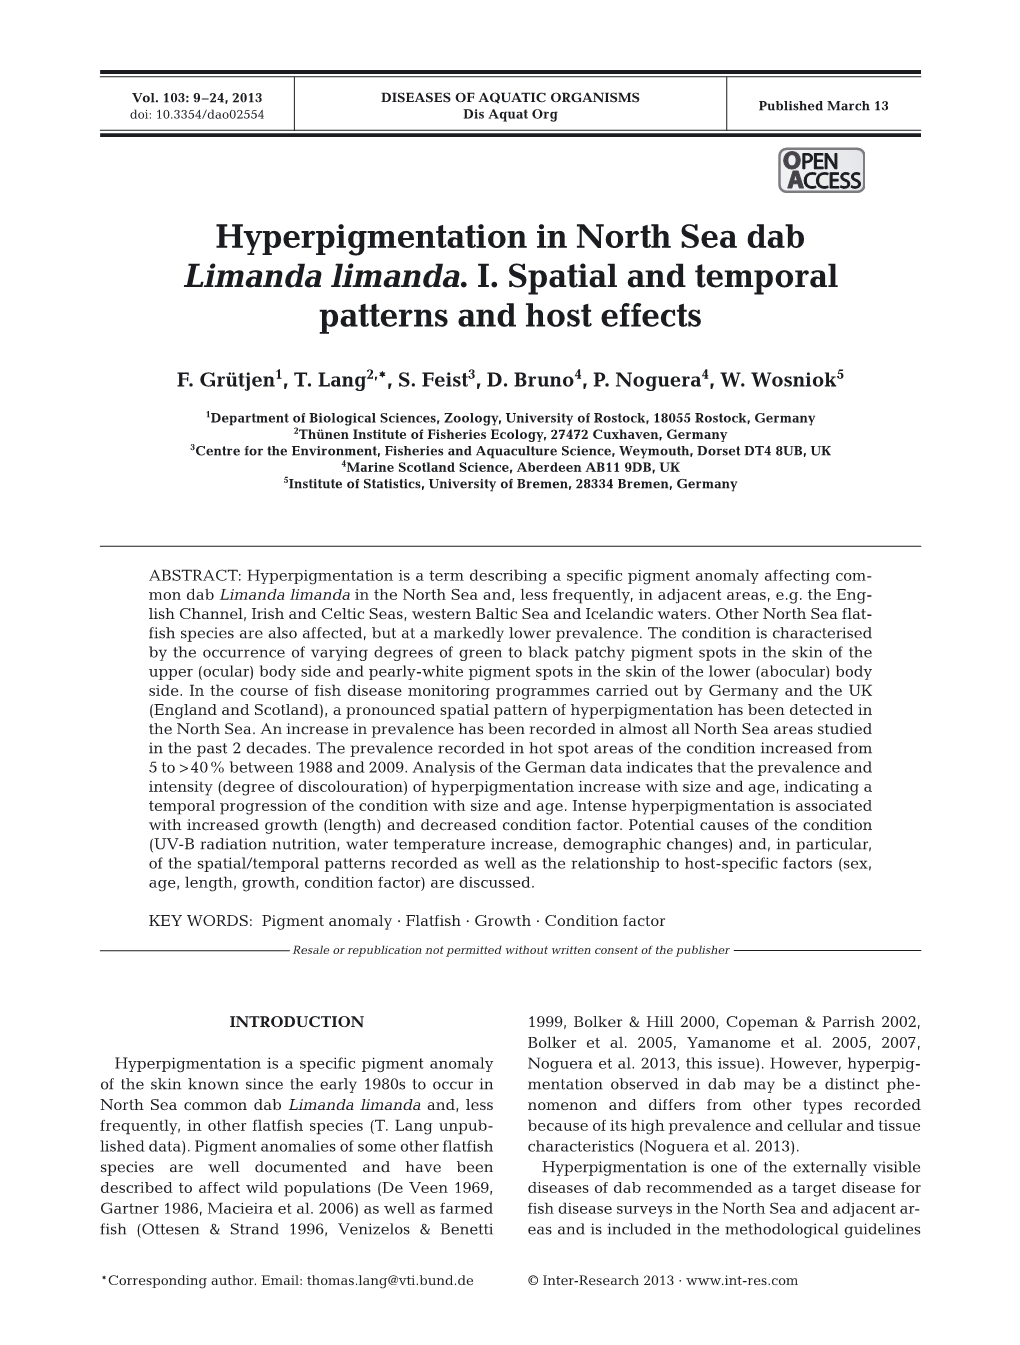 Hyperpigmentation in North Sea Dab Limanda Limanda. I. Spatial and Temporal Patterns and Host Effects